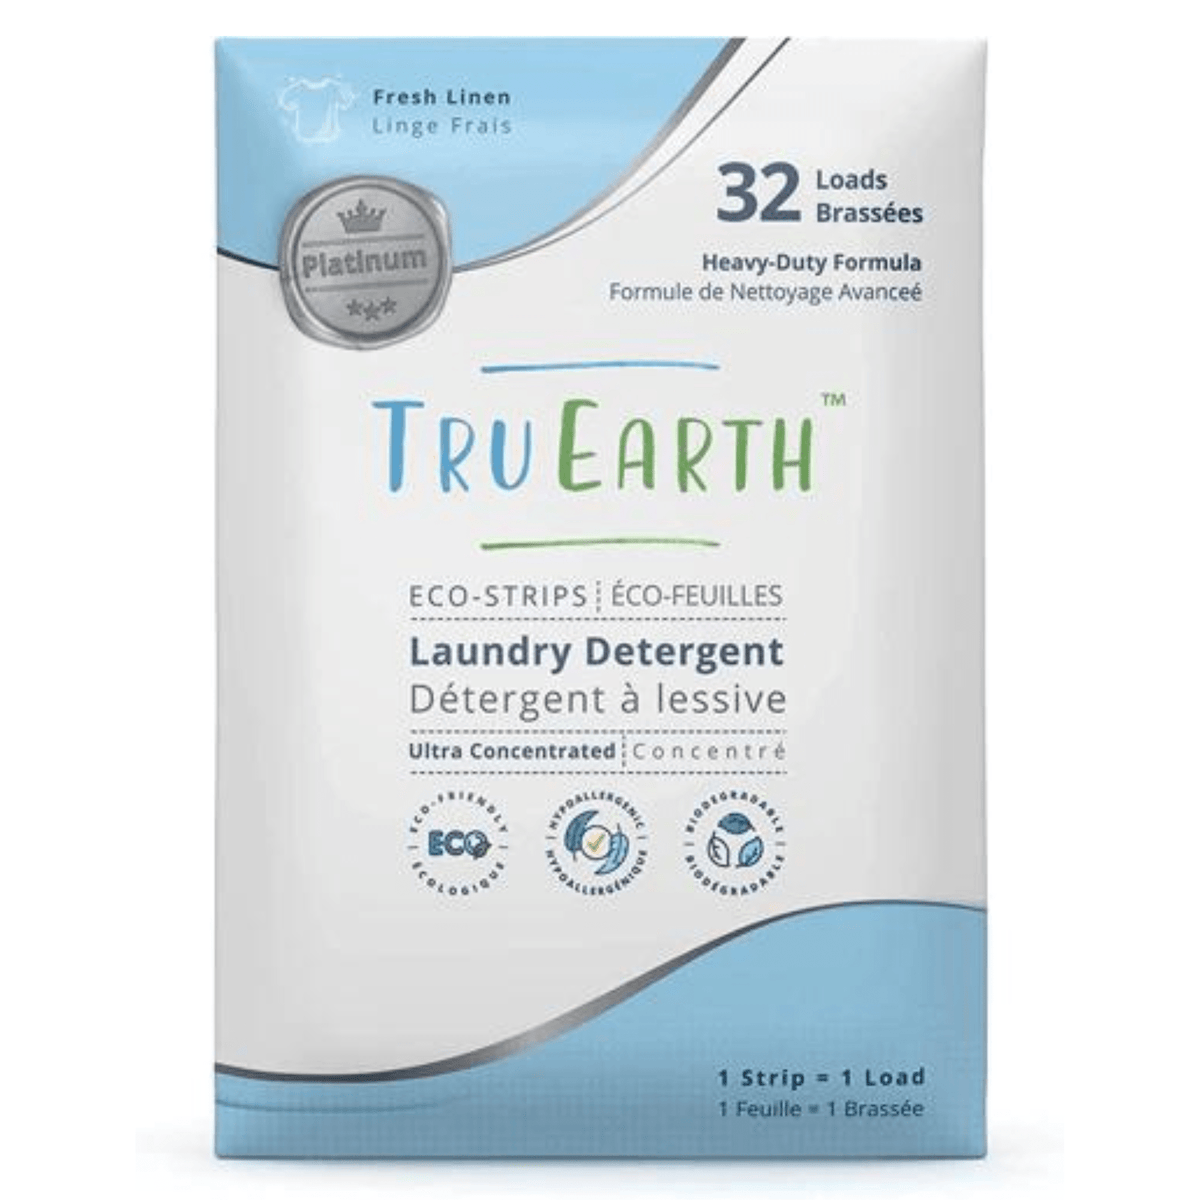 Primary Image of Eco-strips Fresh Linen Laundry Detergent